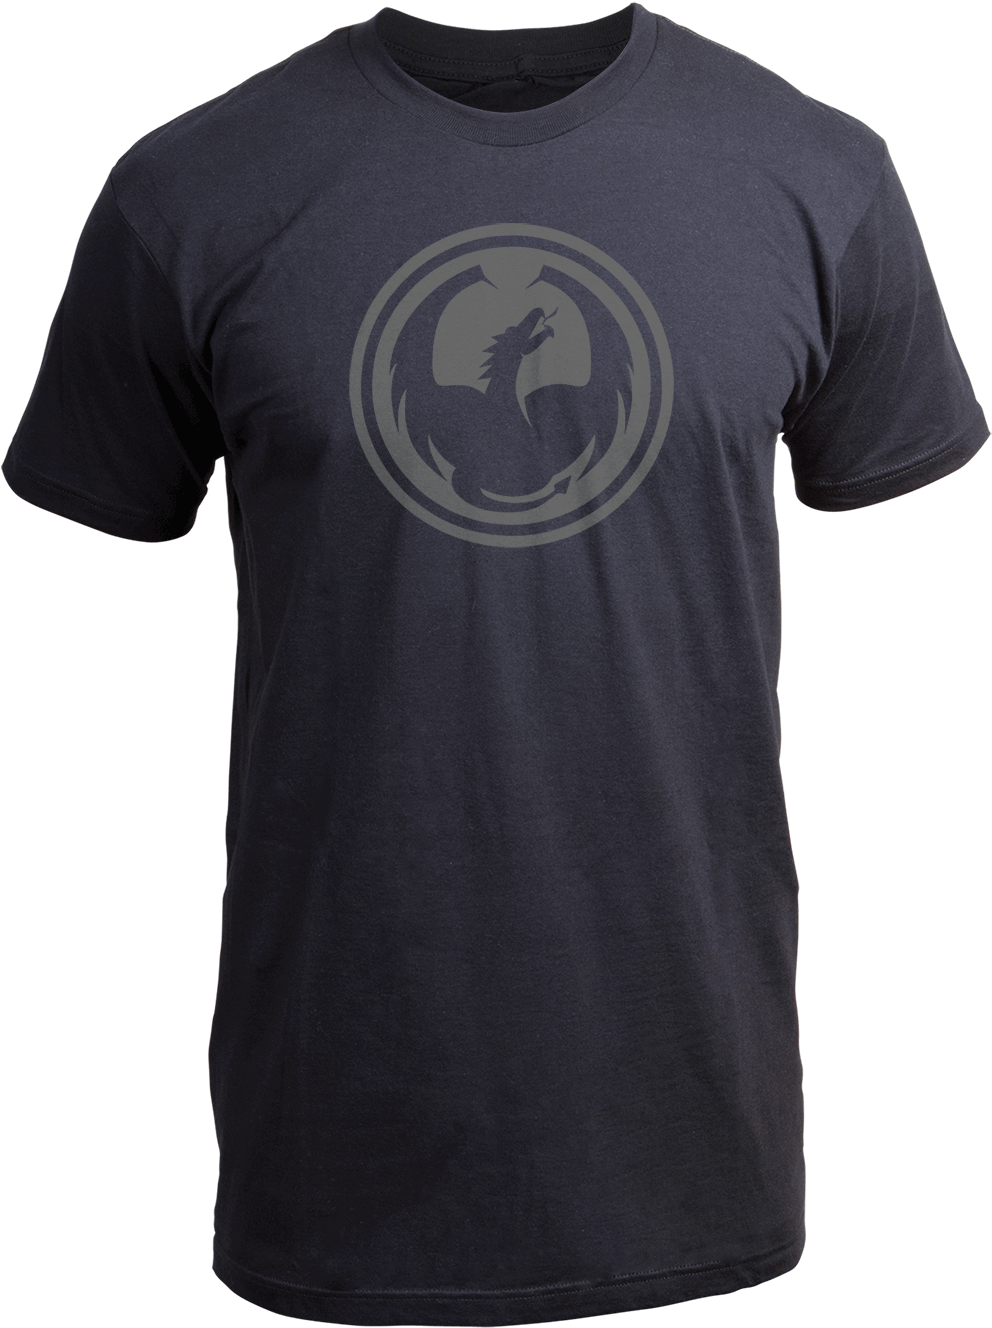 Navy Blue Horse Graphic Tee Shirt PNG image